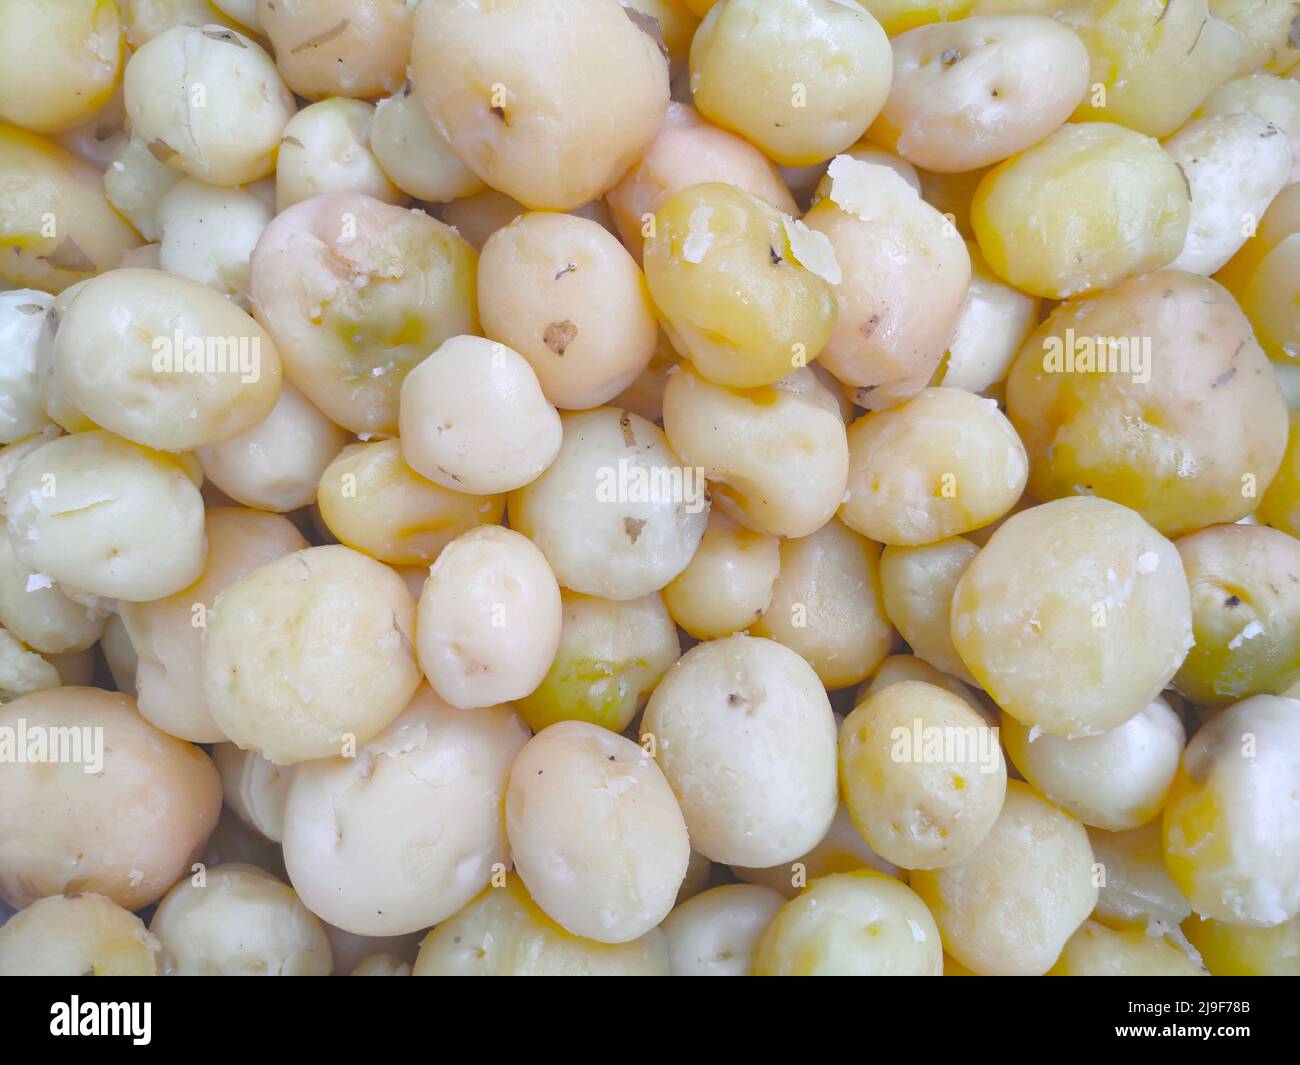 Boiled and peeled off potatoes Stock Photo